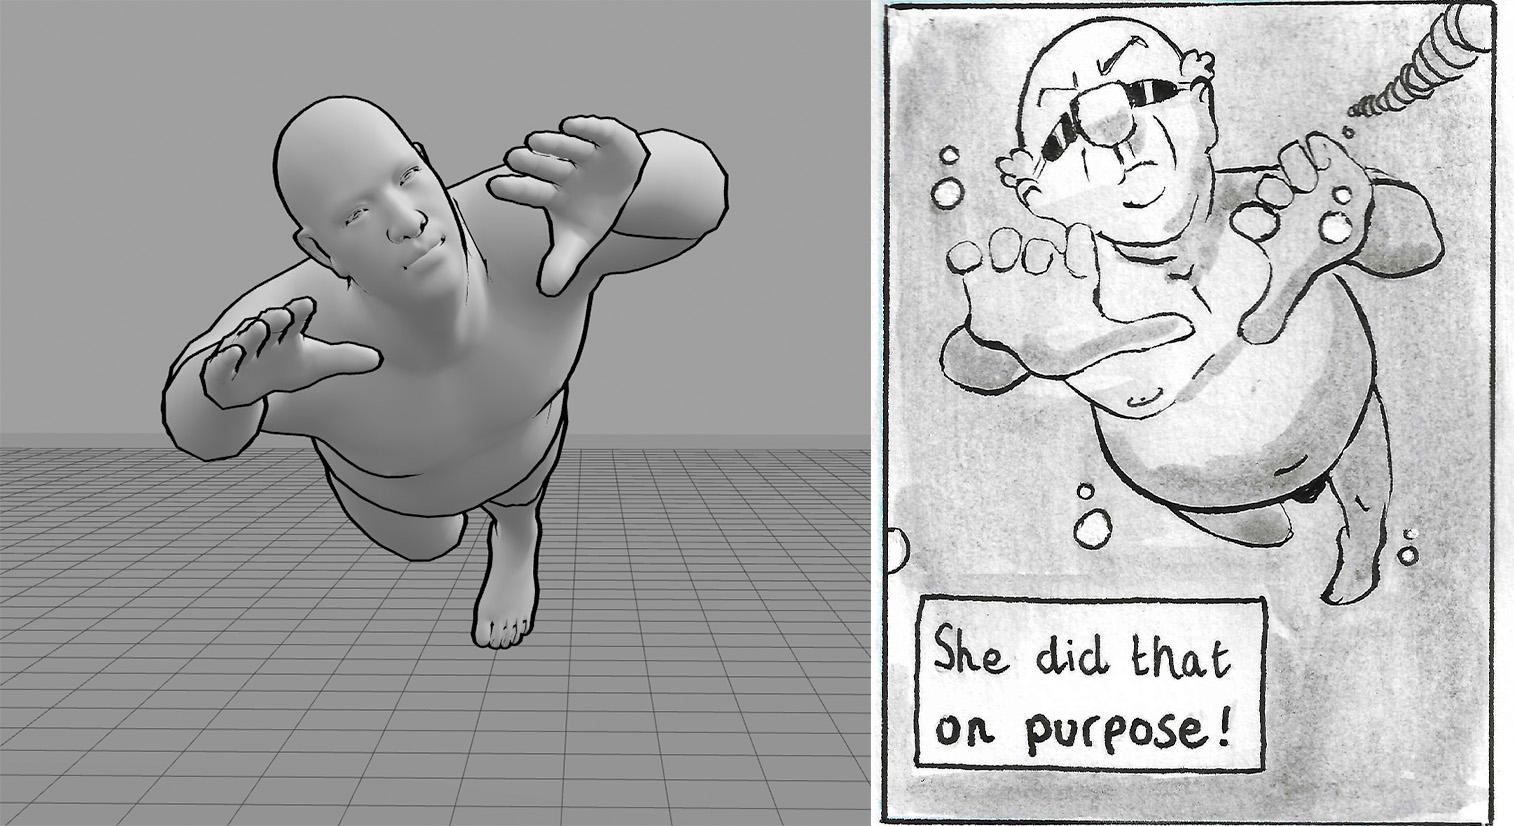 A side by side showing a 3D model of a man swimming on the left and a drawing referenced from that image on the left